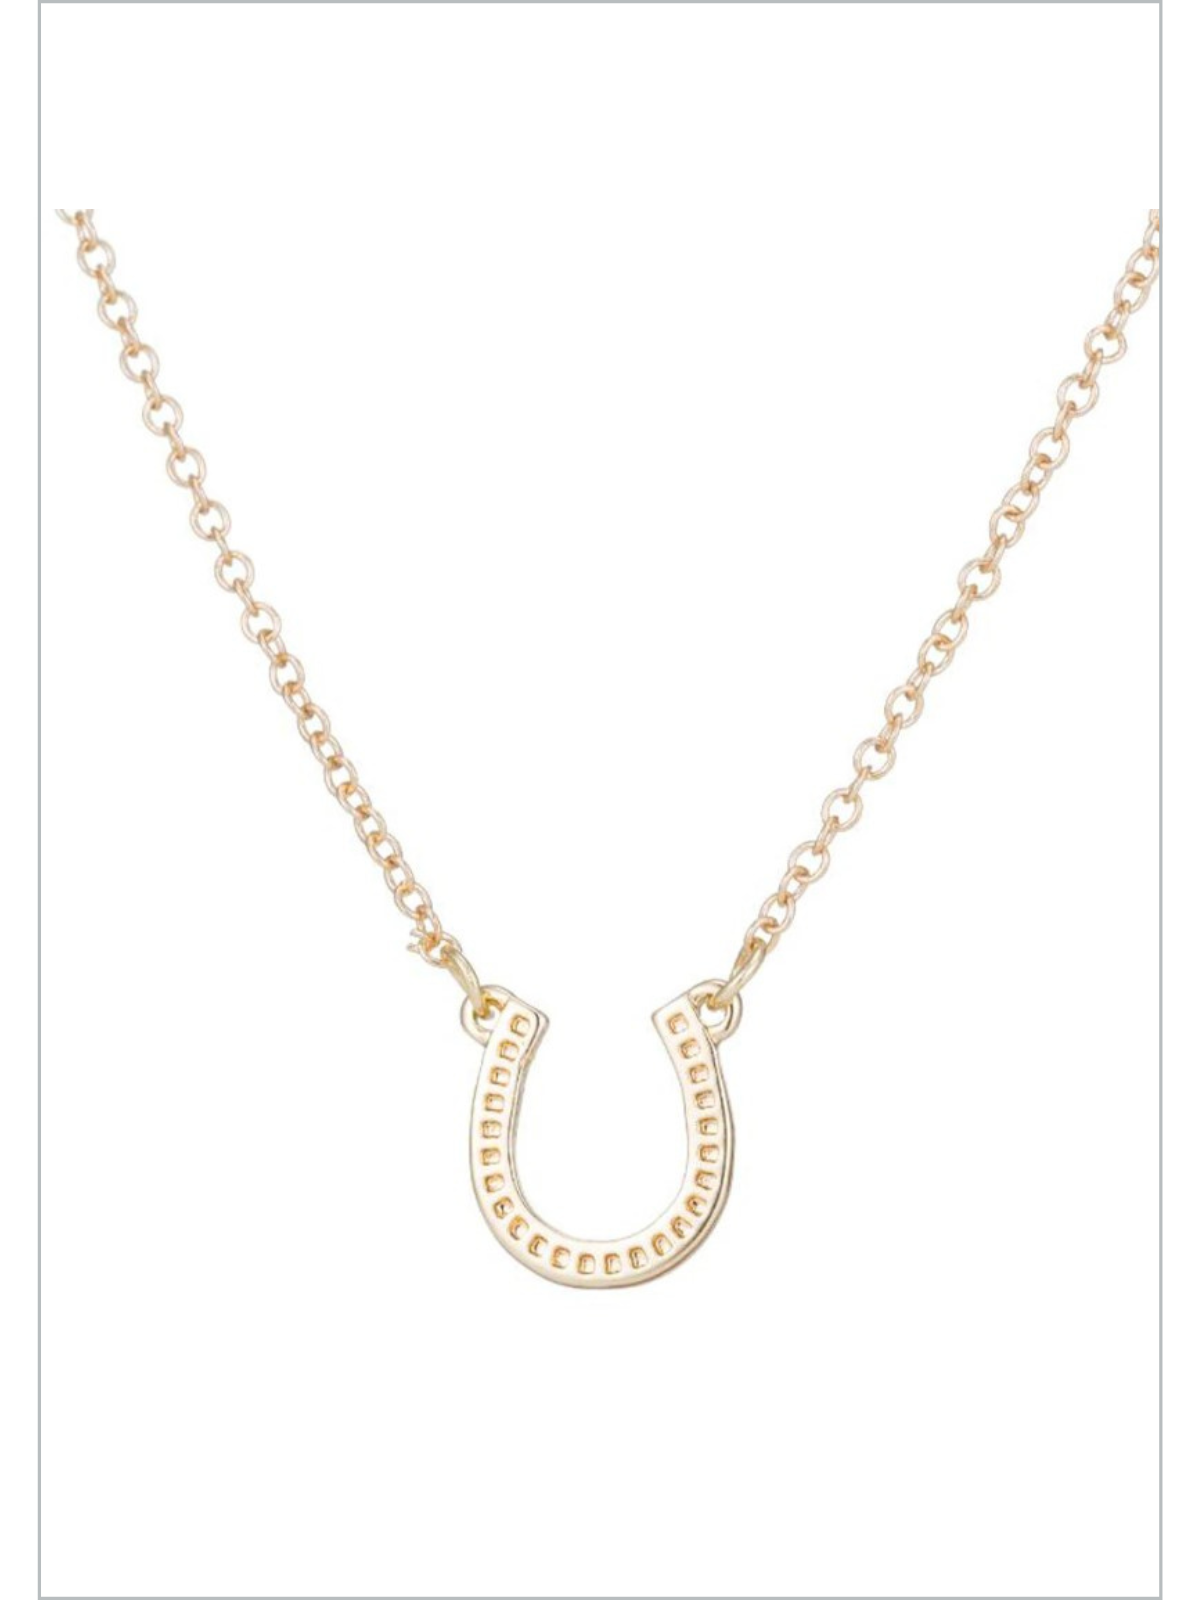 My Lucky Girl Horseshoe Cowgirl Necklace